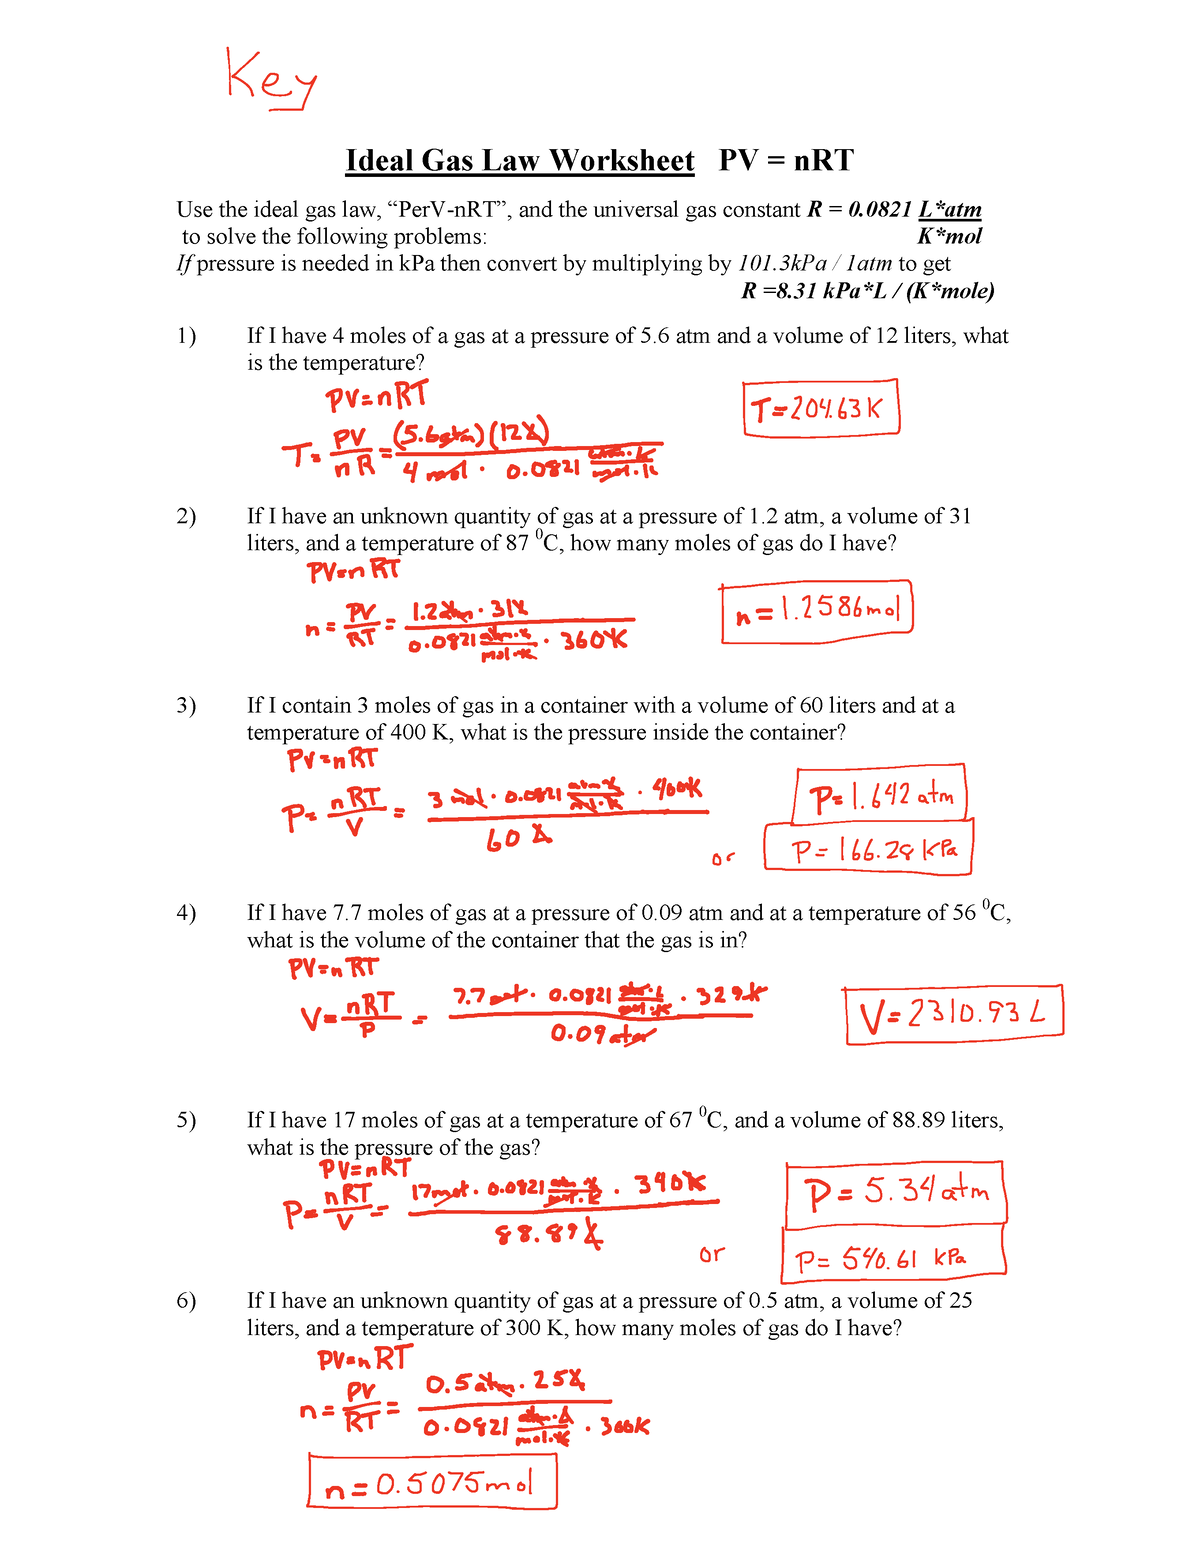 Ideal Gas Law Worksheet 2 Answer Ideal Gas Law Worksheet PV = nRT Use